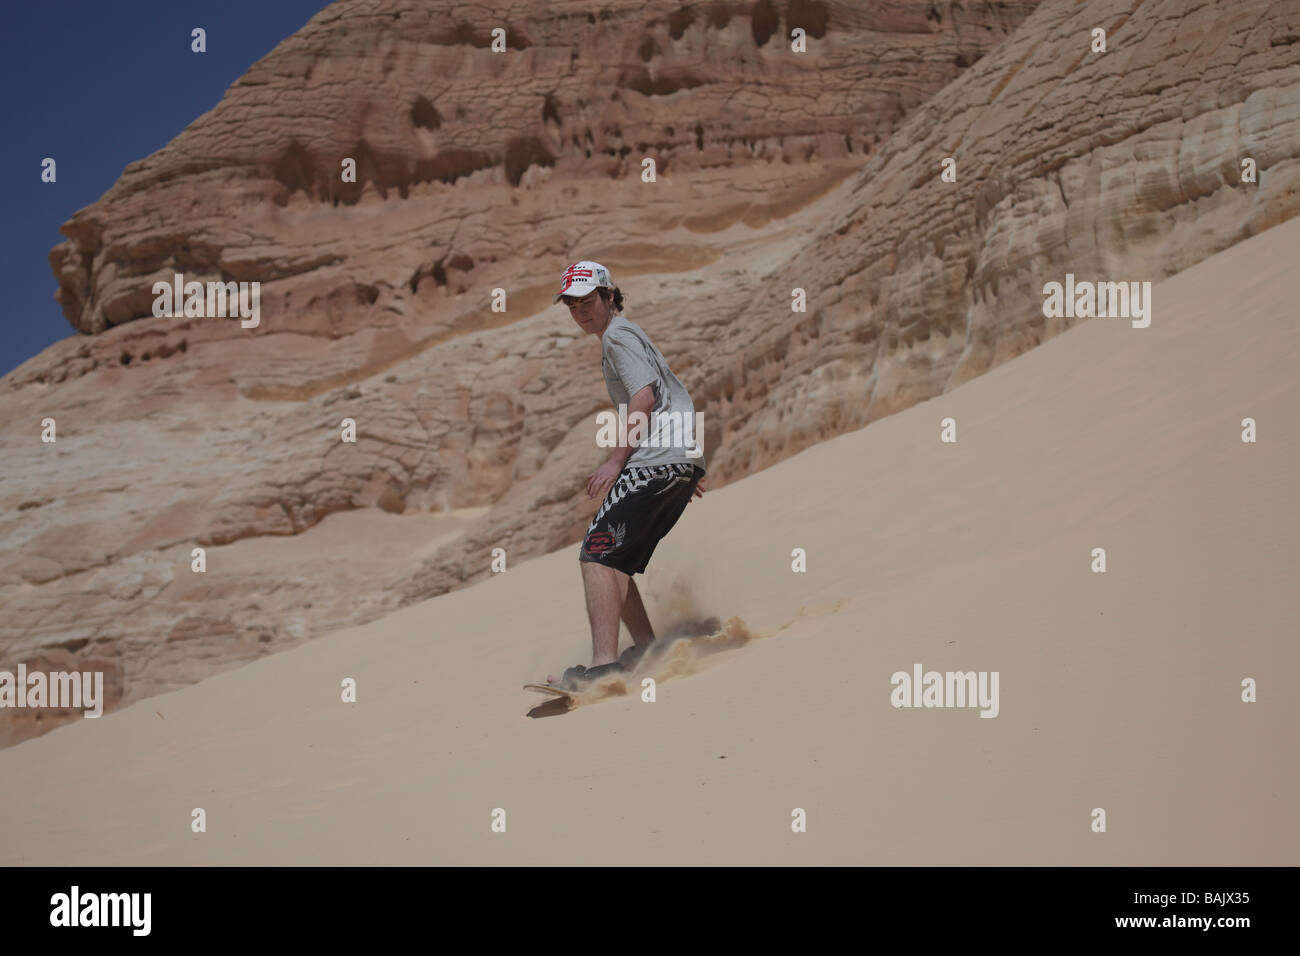 young teenage boy sand boarding down dune in the Sinai desert with mountain rocks in the background Stock Photo